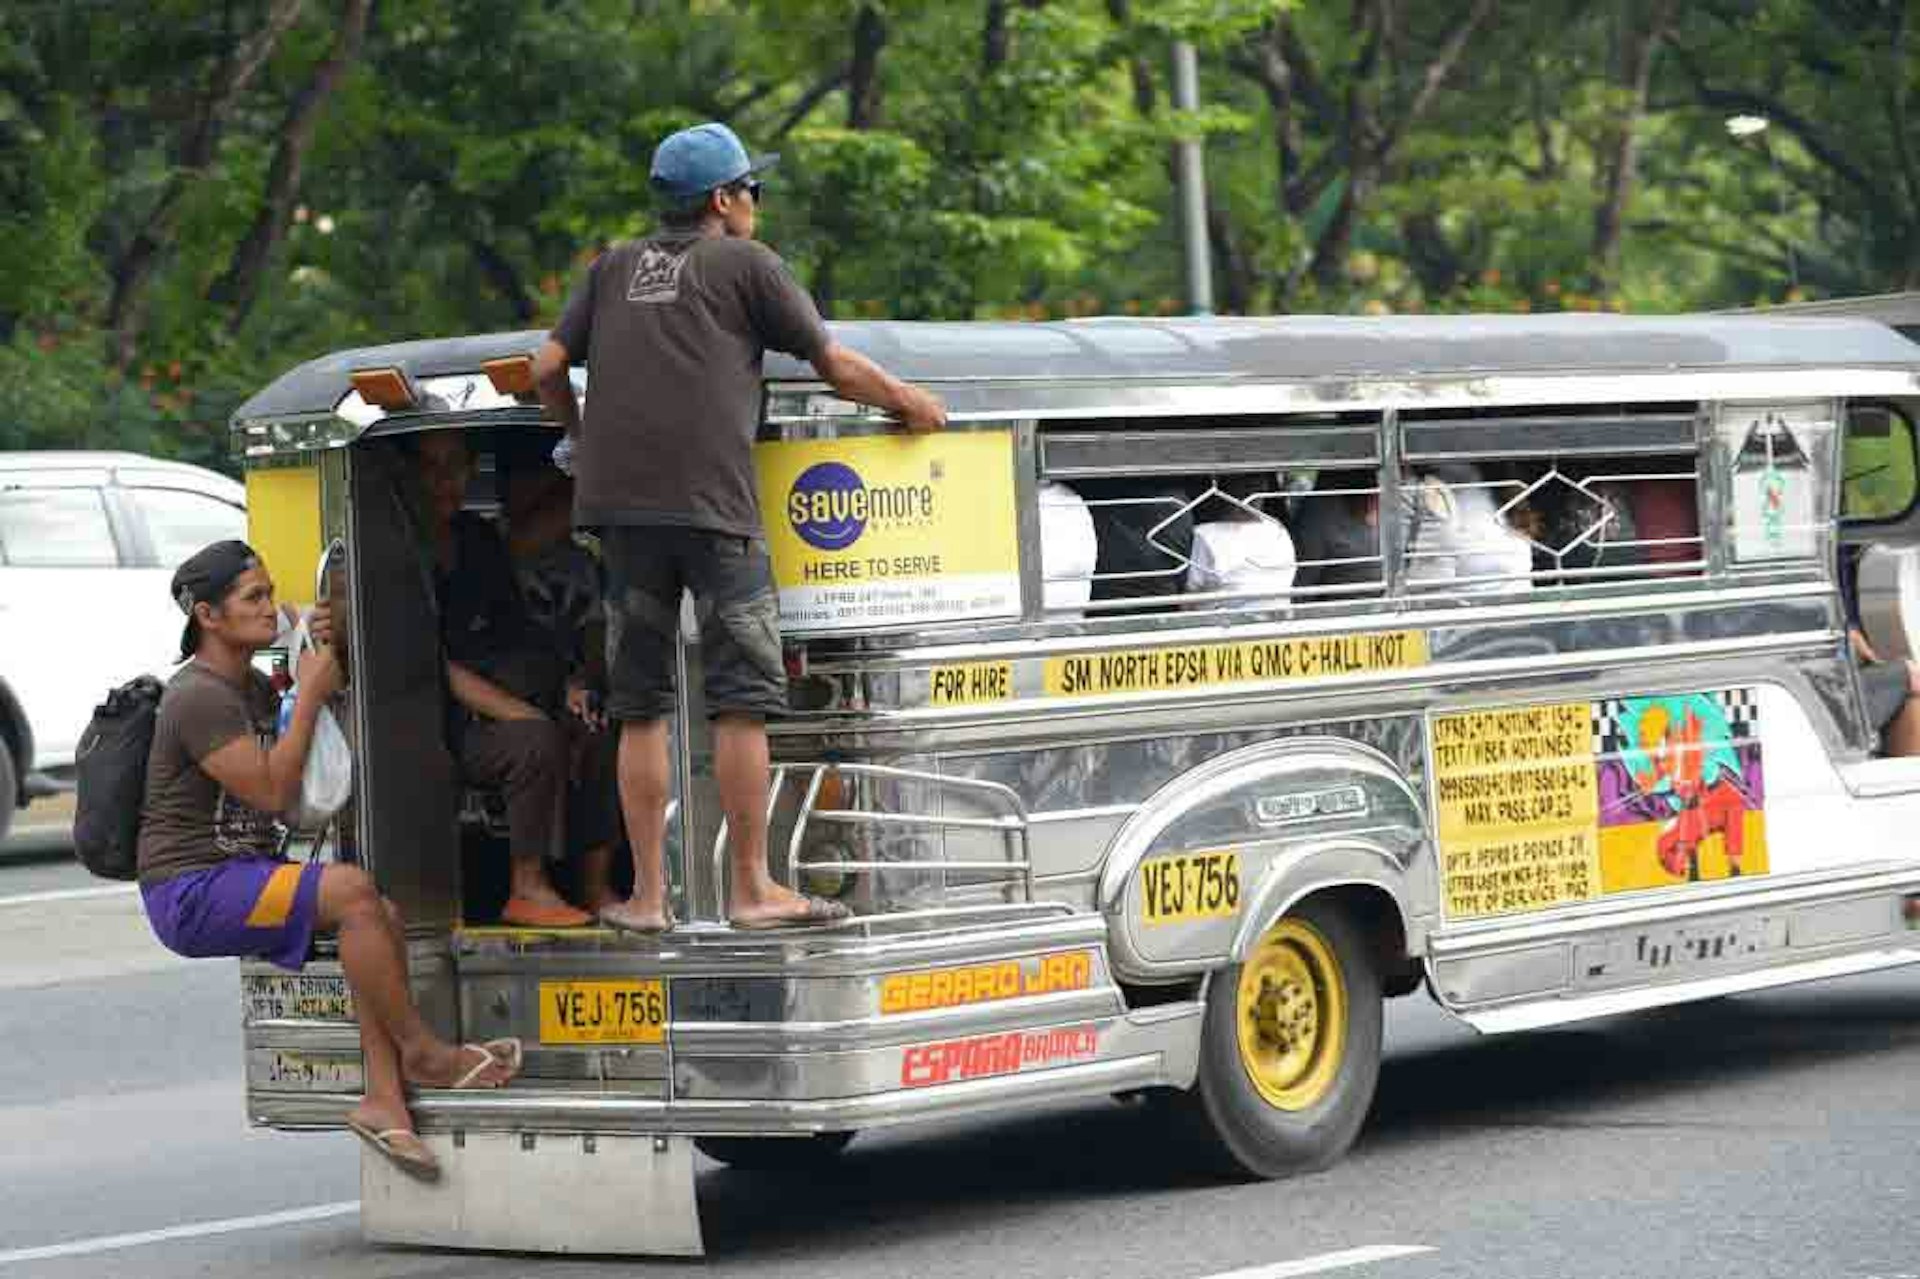 Travel News - PHILIPPINES-JEEPNEY-TRANSPORT-CULTURE